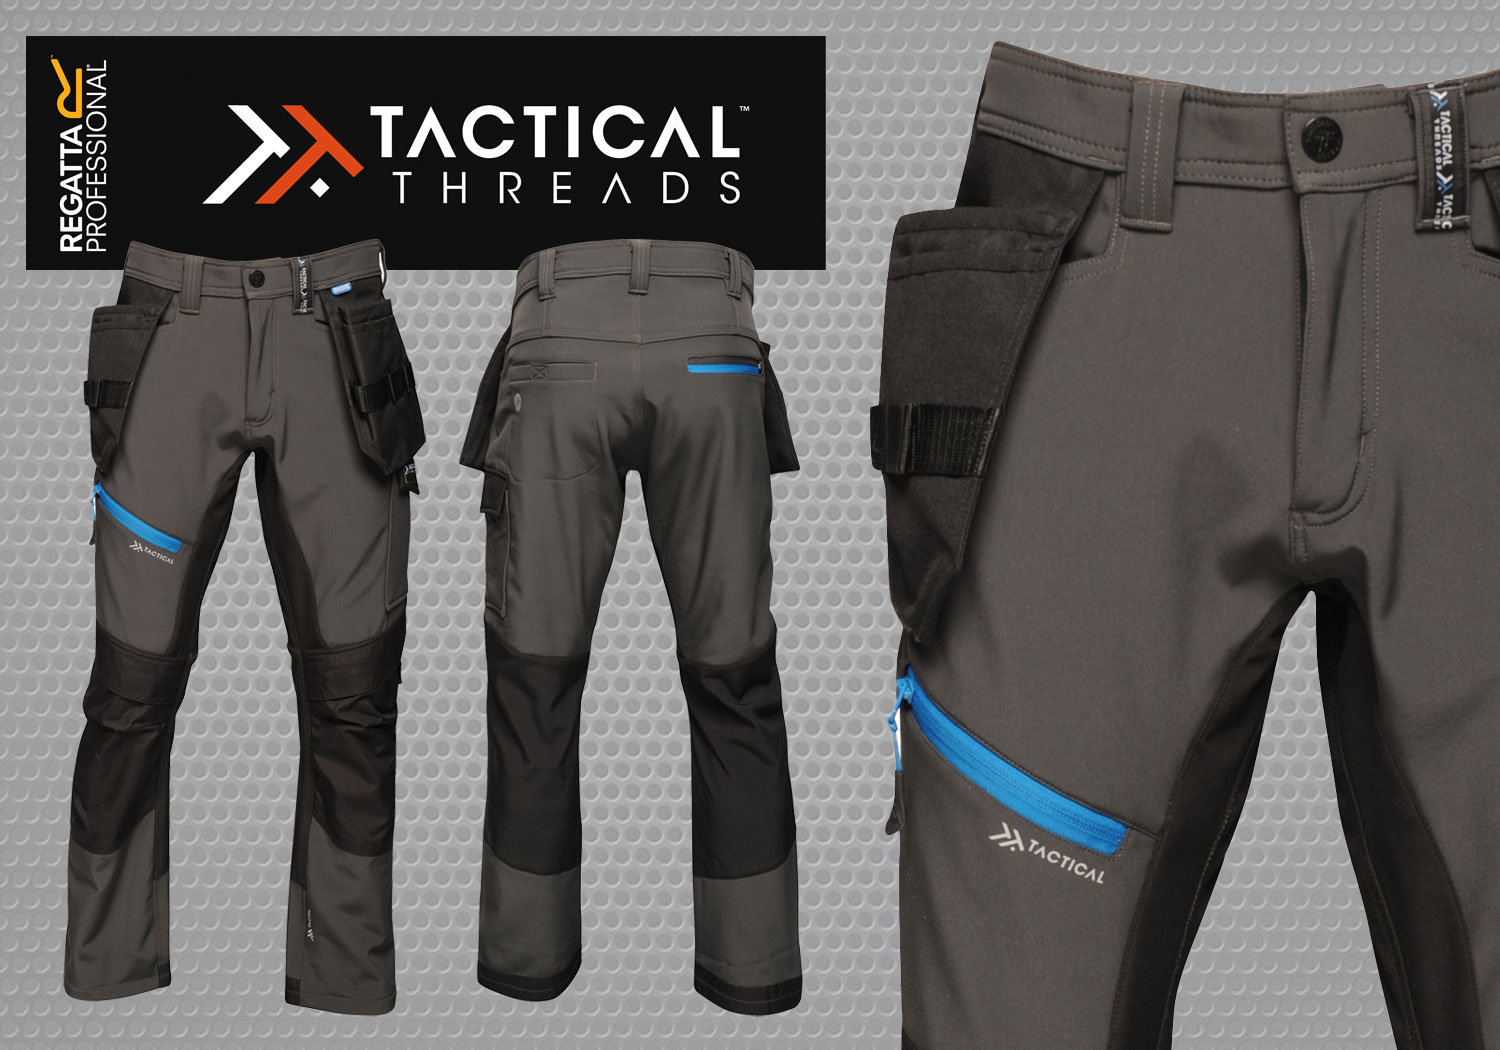 Warm, Windproof, Water Resistant & Stretchy